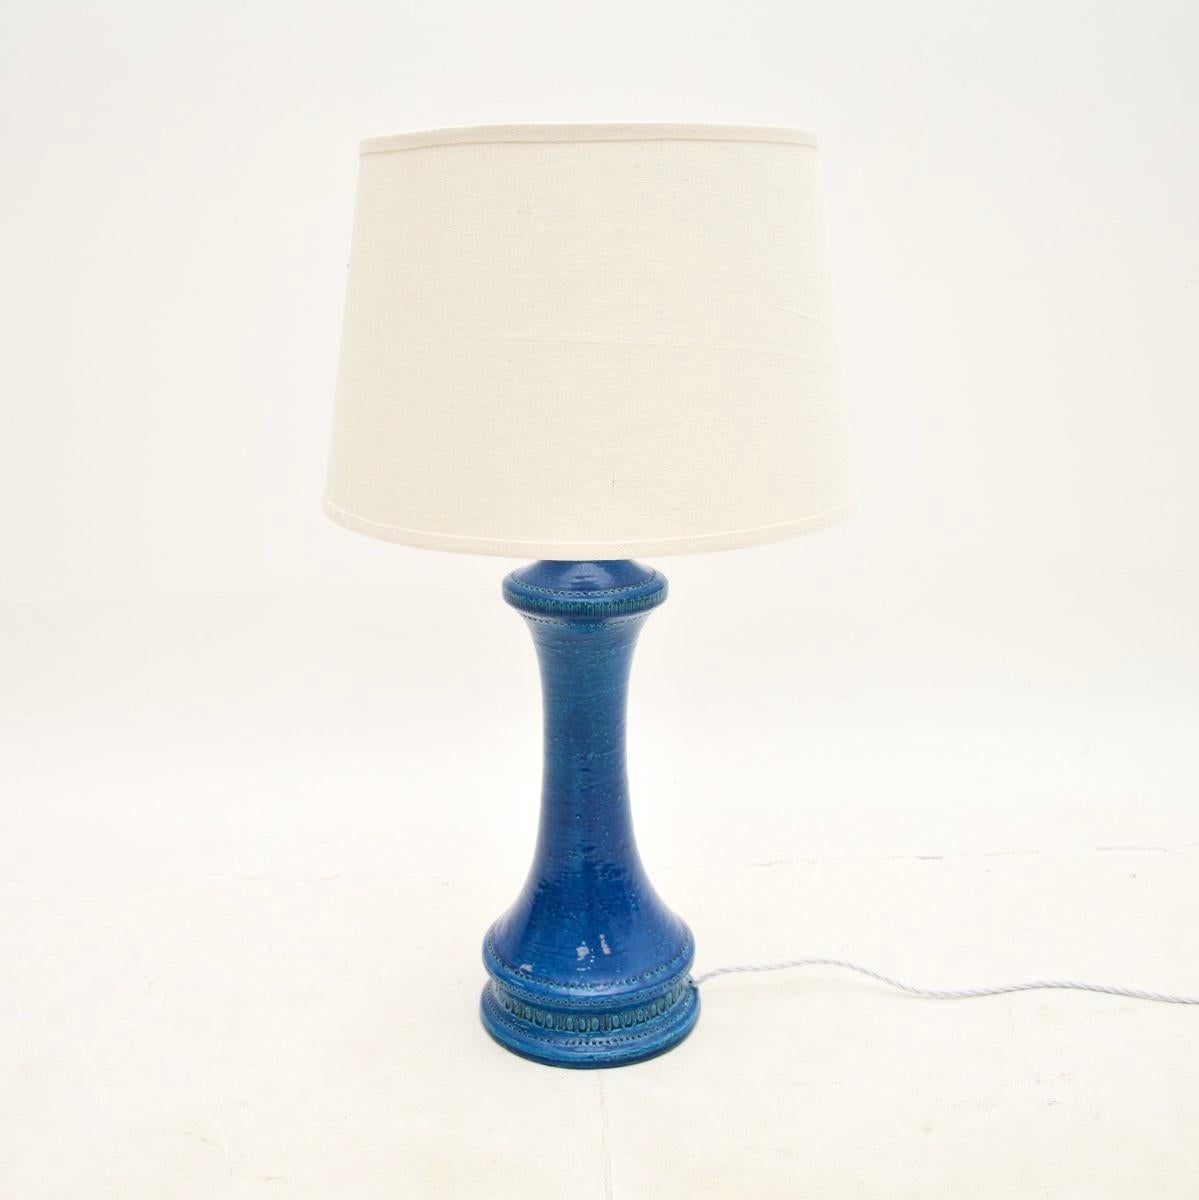 A stunning vintage Italian ceramic table lamp by Aldo Londi for Bitossi. It was made in Italy and dates from around the 1960’s.

It is in beautiful rimini blue, with a lovely design and gorgeous patterns. It is a large and impressive size, and would